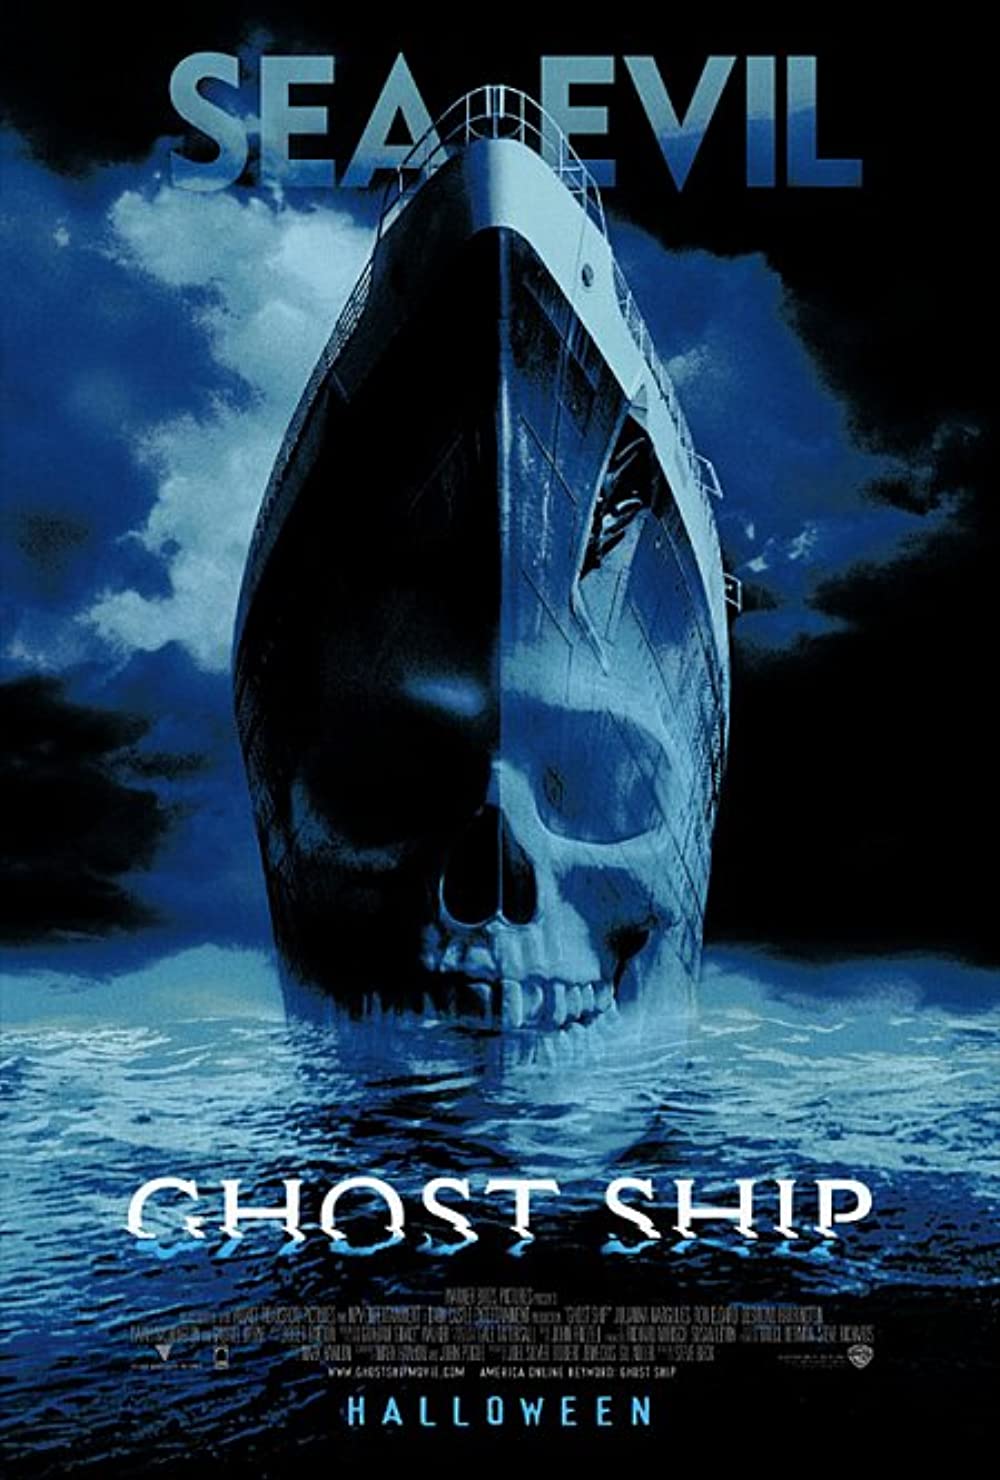 Tremble Ep 199: Ghost Ship